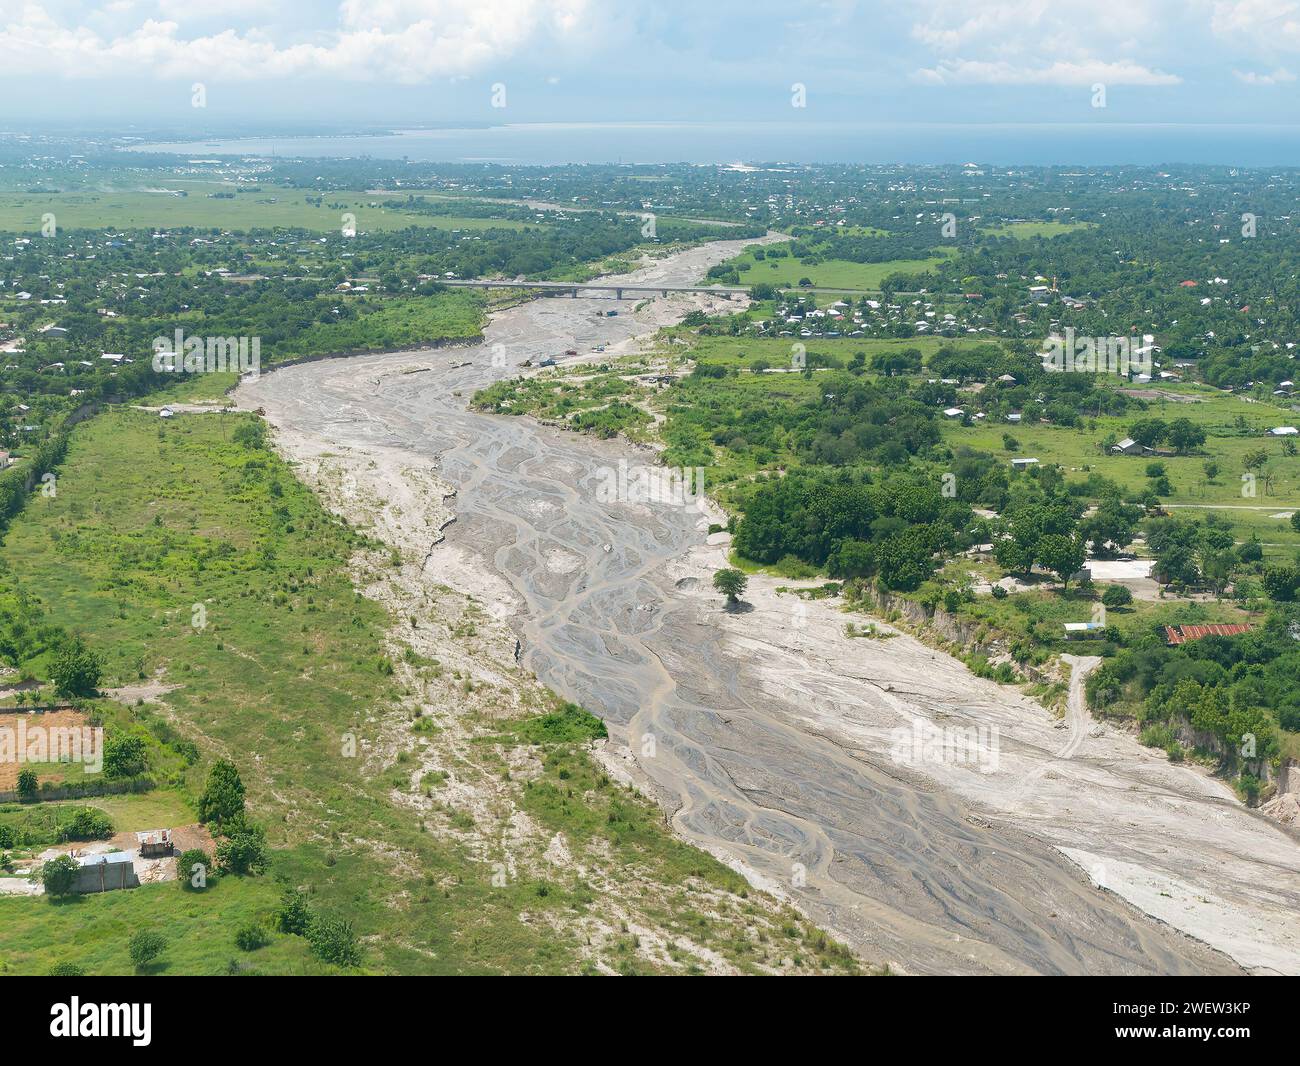 The dried out river bed of Makar River near General Santos City, South Cotabato Province, Soccsksargen Region, Mindanao, Philippines. Stock Photo